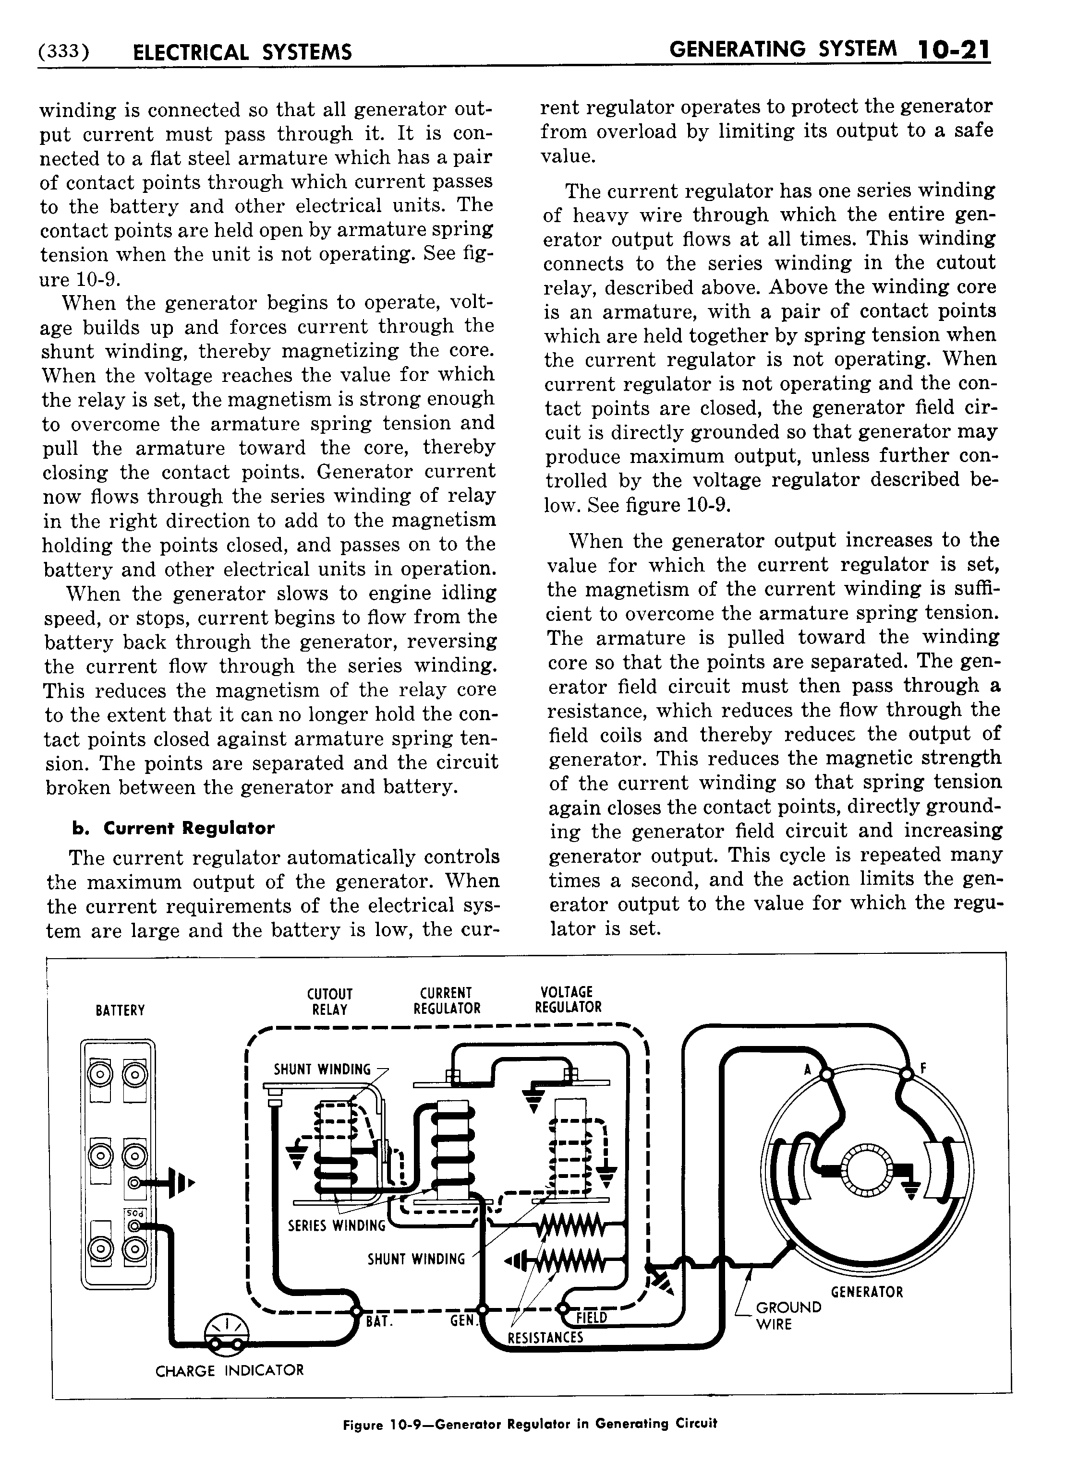 n_11 1954 Buick Shop Manual - Electrical Systems-021-021.jpg